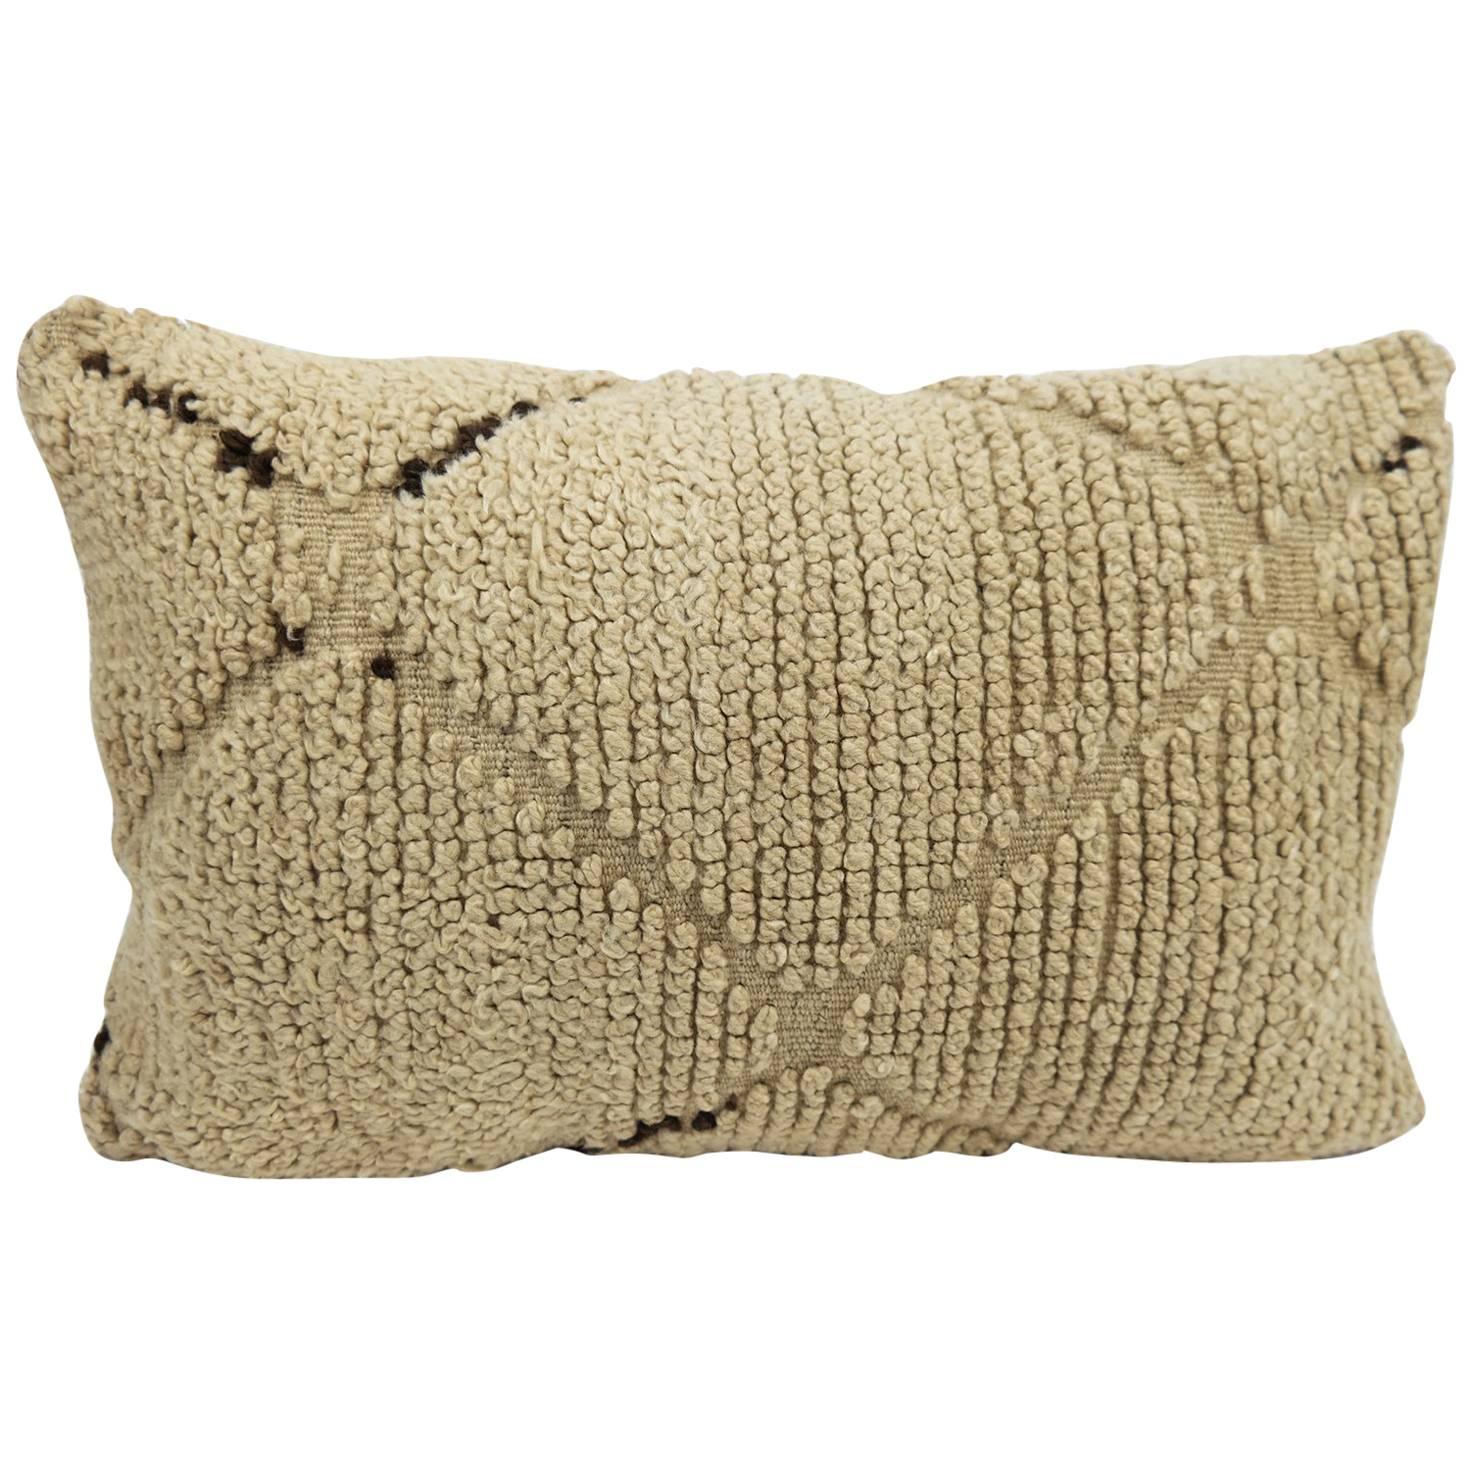 Moroccan Pillow Beni Ourain pillow from Morocco Berber Cushion For Sale